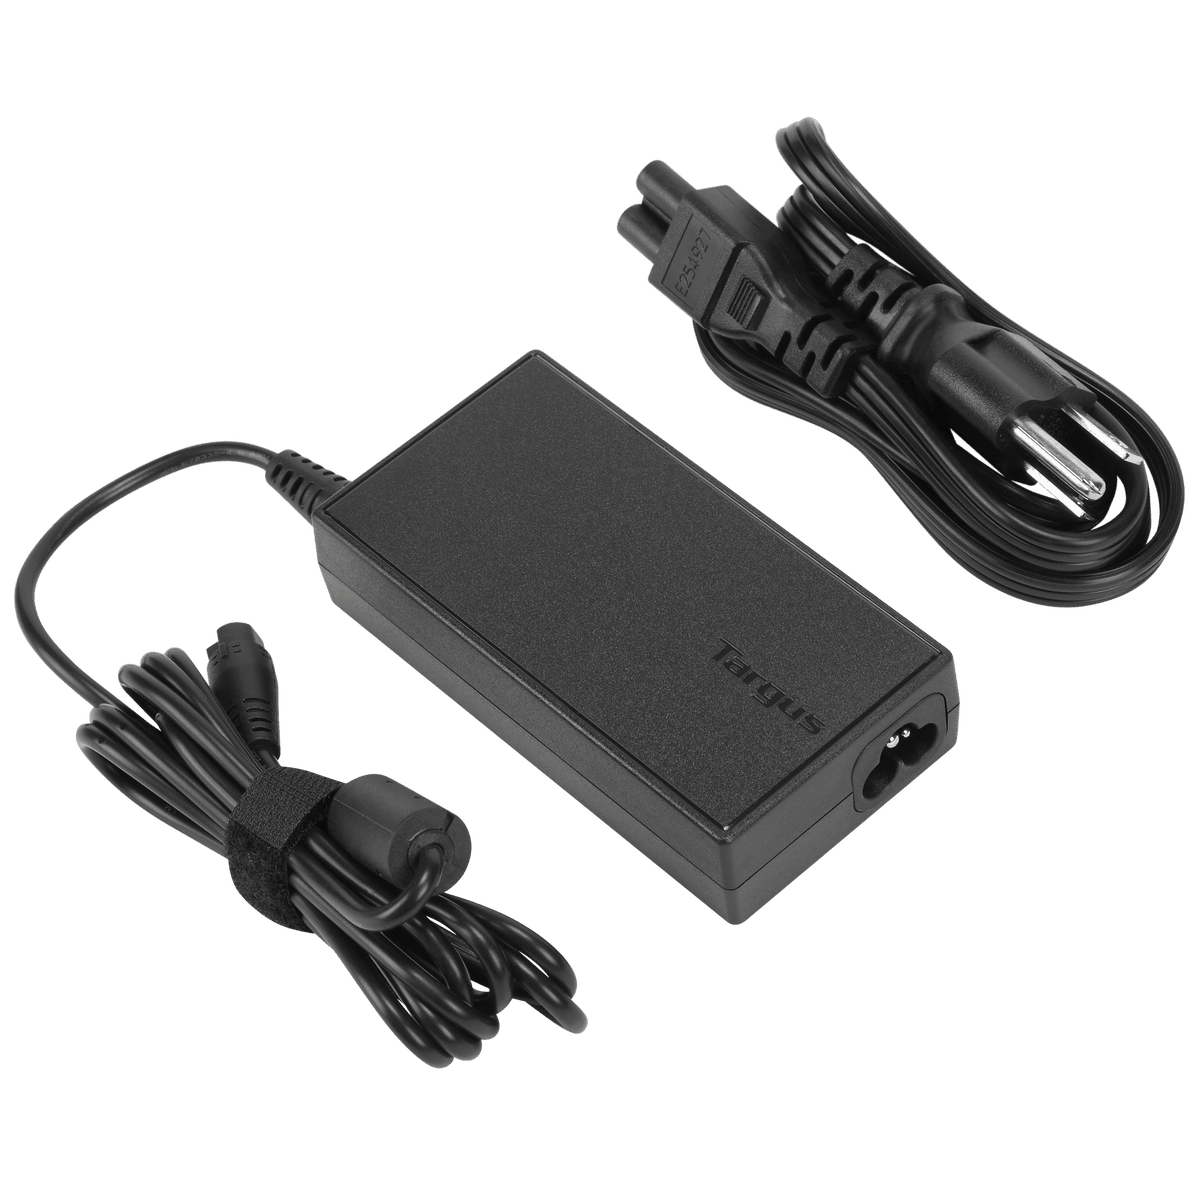 Chargeur universel POWERUP 90W compatible HP, 3 embouts, compact